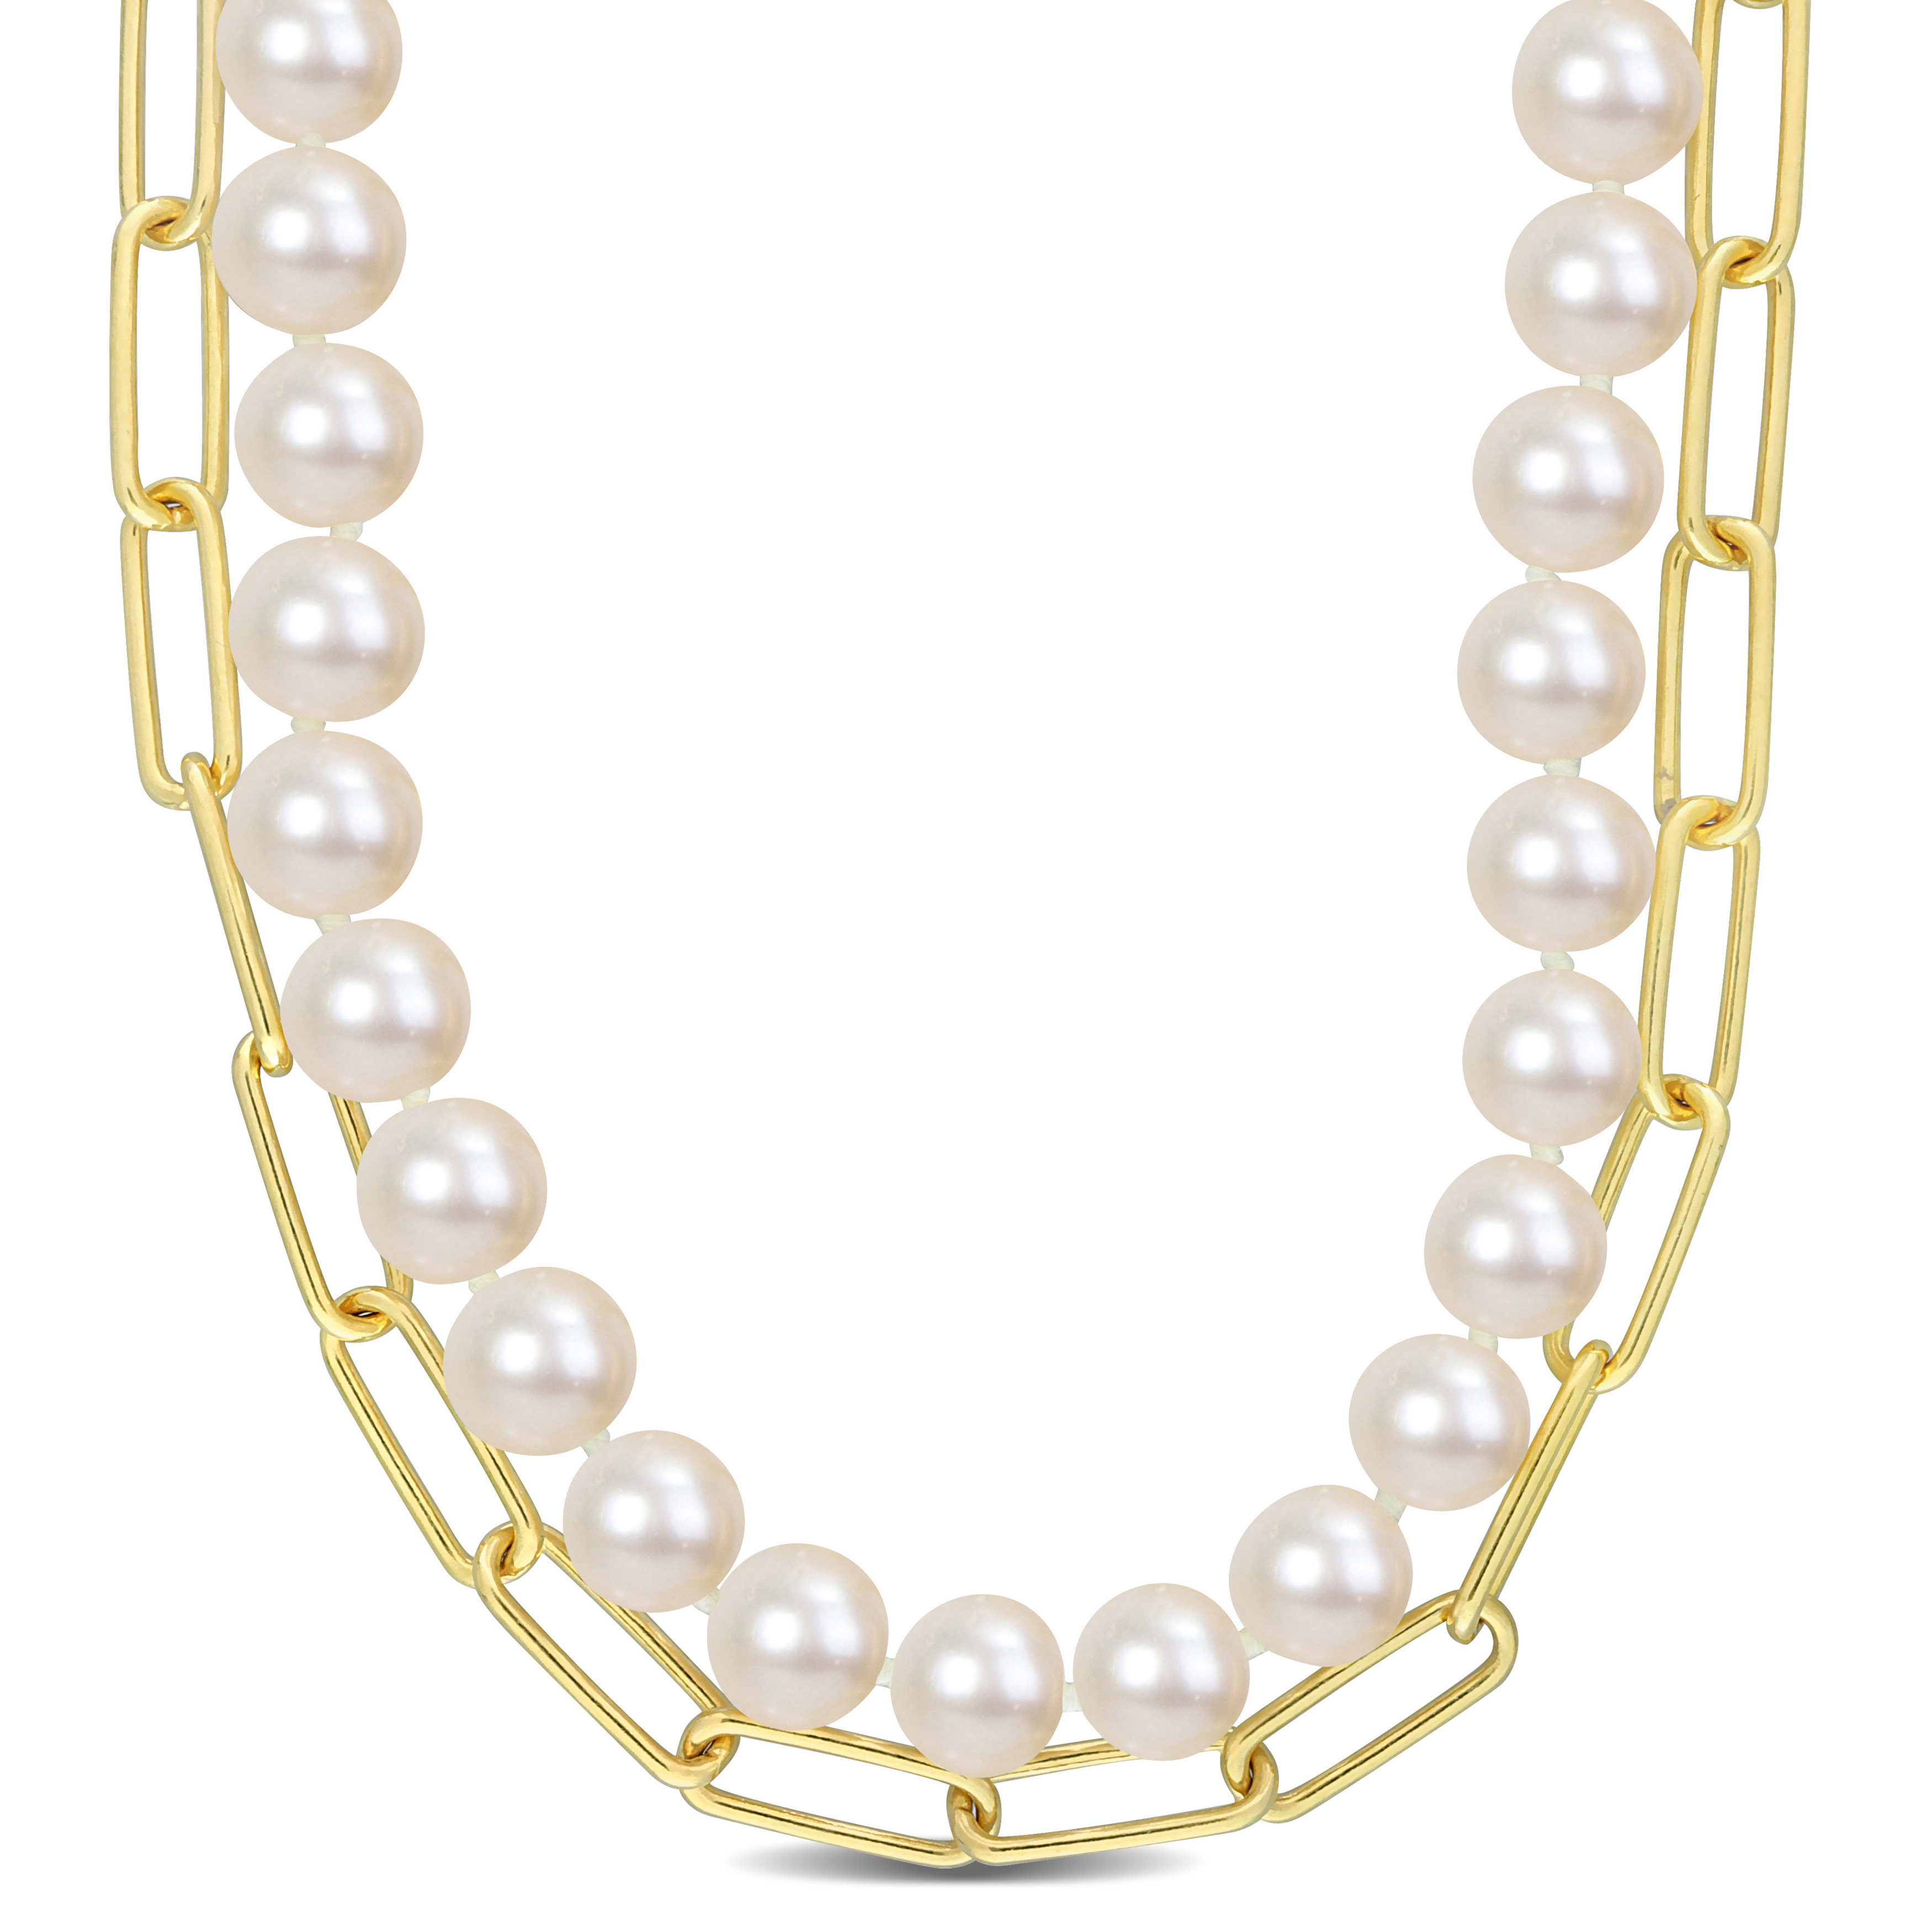 7-7.5 MM Cultured Freshwater Pearl and 5 MM Link Chain Layered Necklace in 18k Yellow Gold Plated Sterling Silver - 18 in.